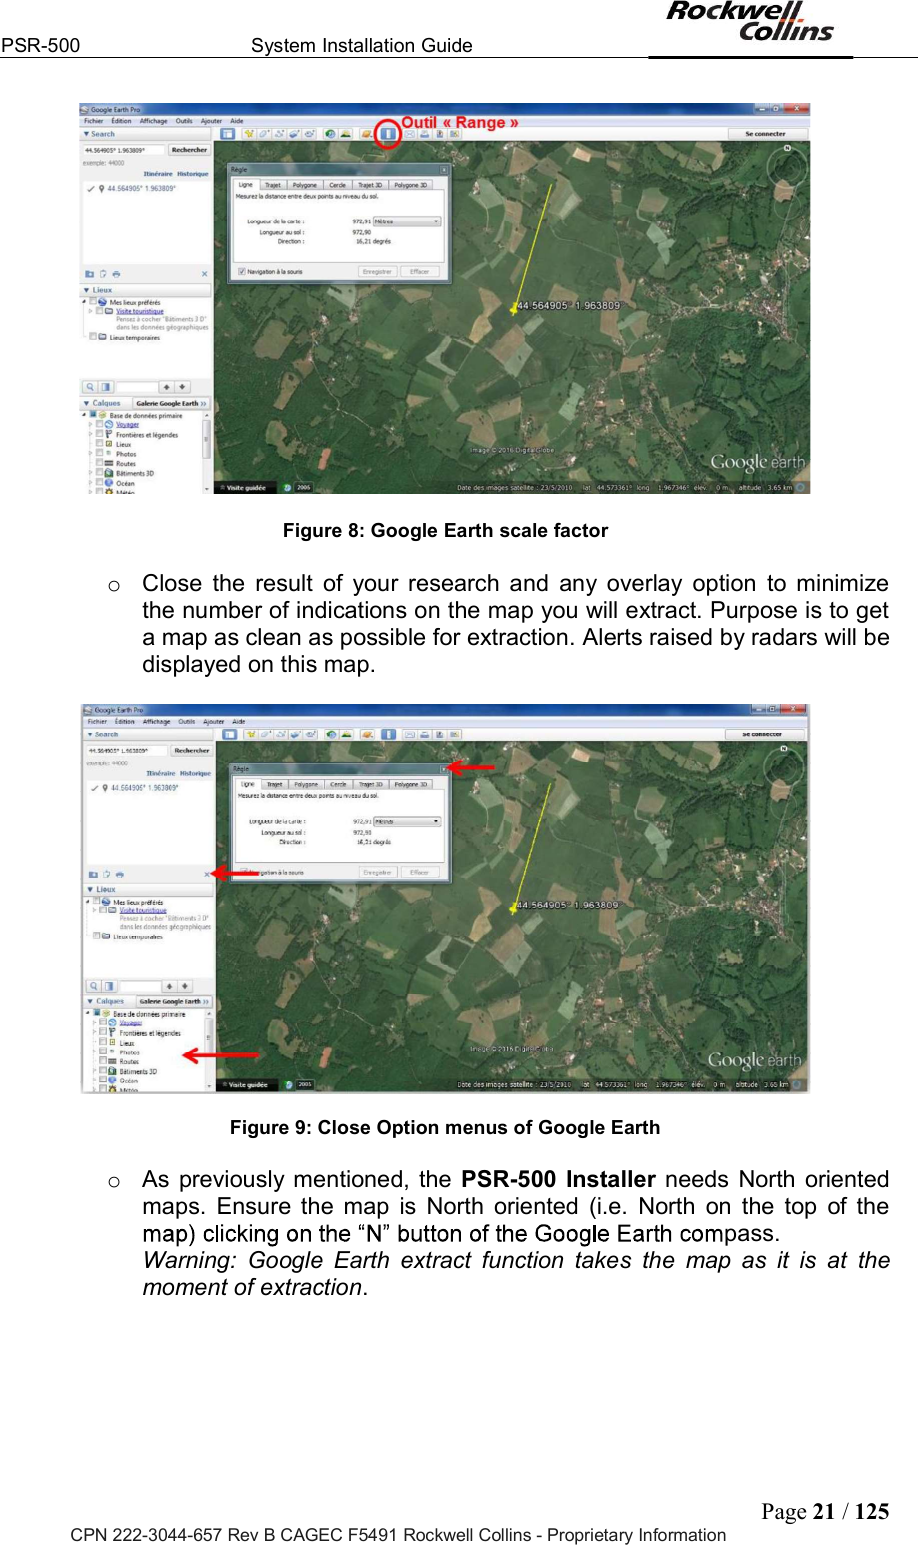 PSR-500  System Installation Guide  Page 21 / 125 CPN 222-3044-657 Rev B CAGEC F5491 Rockwell Collins - Proprietary Information   Figure 8: Google Earth scale factor  o  Close  the  result  of  your  research and  any  overlay  option  to  minimize the number of indications on the map you will extract. Purpose is to get a map as clean as possible for extraction. Alerts raised by radars will be displayed on this map.     Figure 9: Close Option menus of Google Earth  o  As previously mentioned, the PSR-500 Installer needs North oriented maps.  Ensure the  map  is  North  oriented  (i.e.  North  on  the  top  of the pass.Warning:  Google  Earth  extract  function  takes  the  map  as  it  is  at  the moment of extraction.   